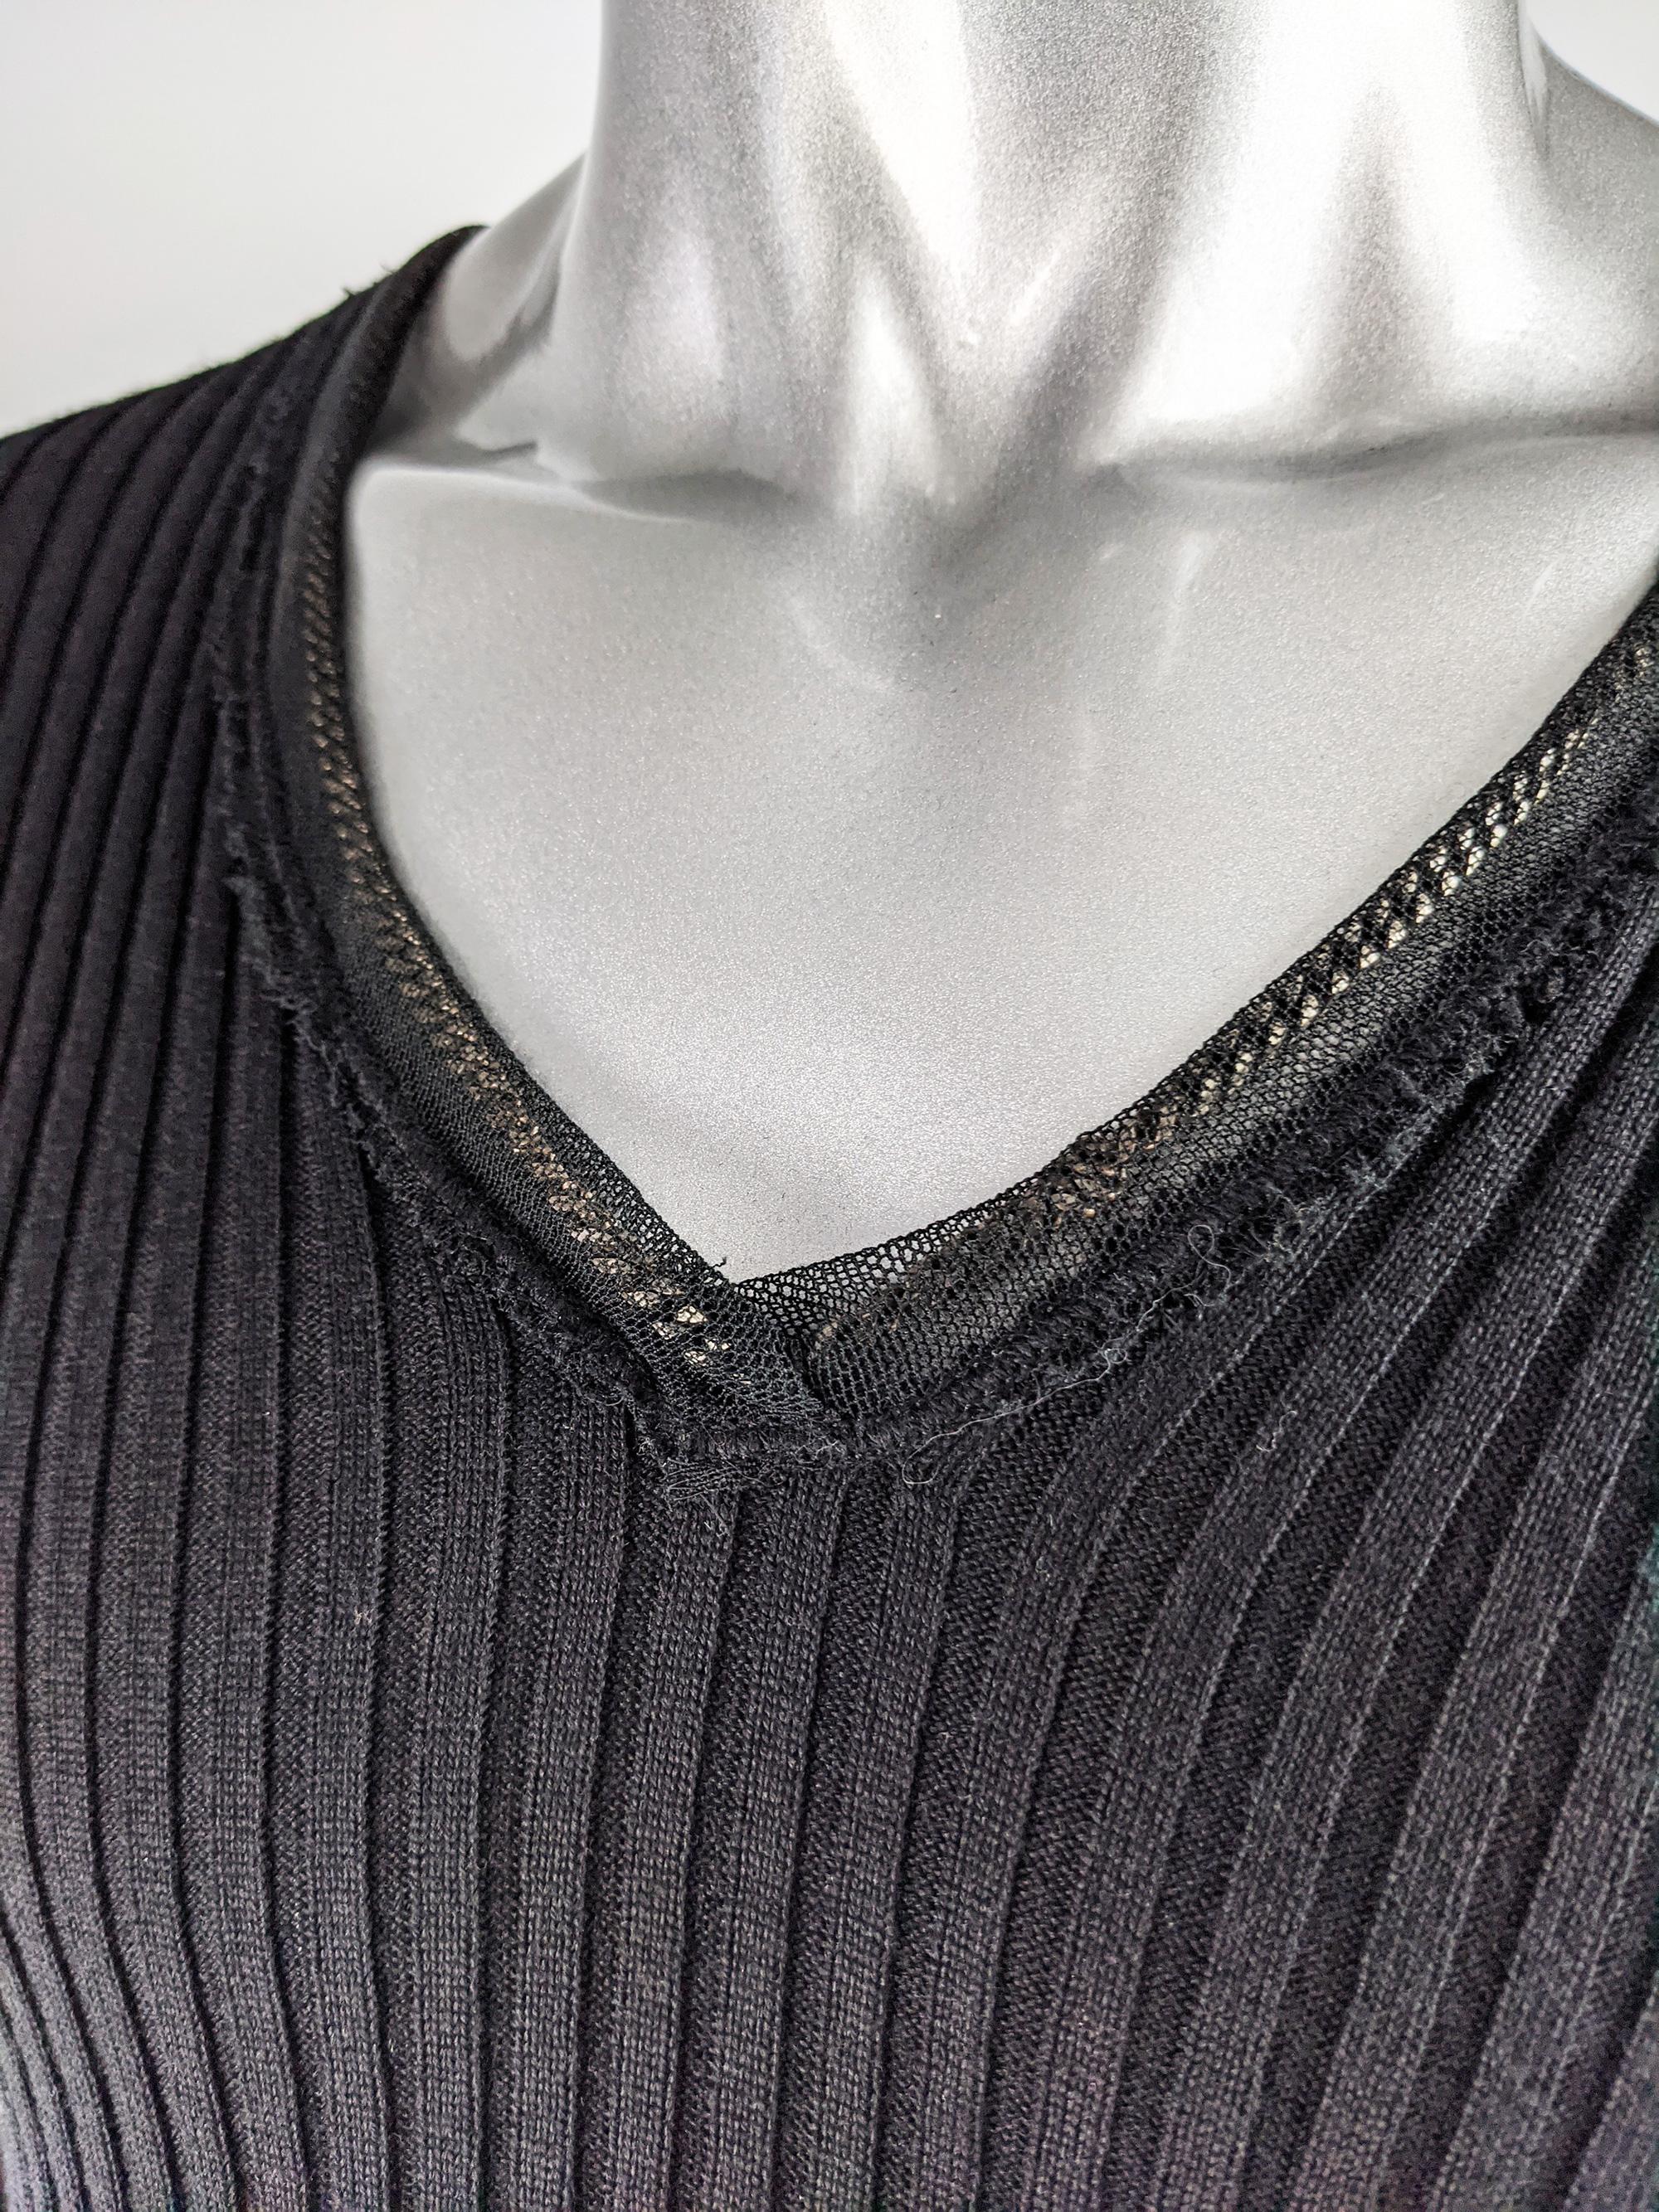 Black Jean Paul Gaultier Vintage Mens Chain Ribbed Knit Top